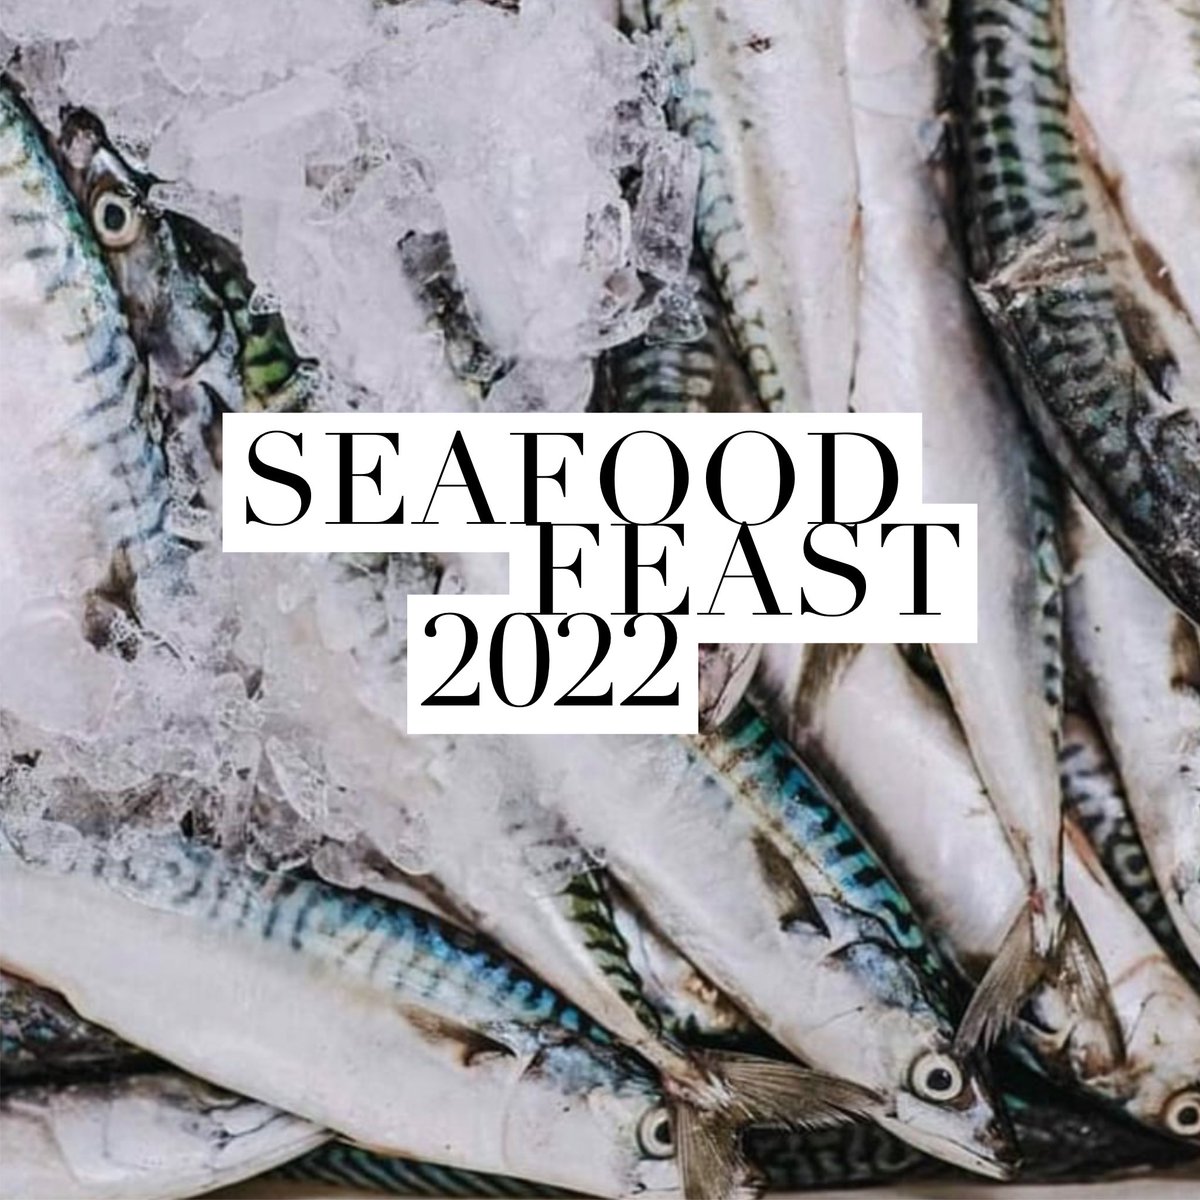 We are delighted to welcome back #englandsseafoodfeast @EnglishRiviera Between 30.9.22 - 9.10.22 building on our success in 2018-2019 Keep following us to find out more as we reveal what we have planned for 2022! #englandsseafoodcoast #englishriviera